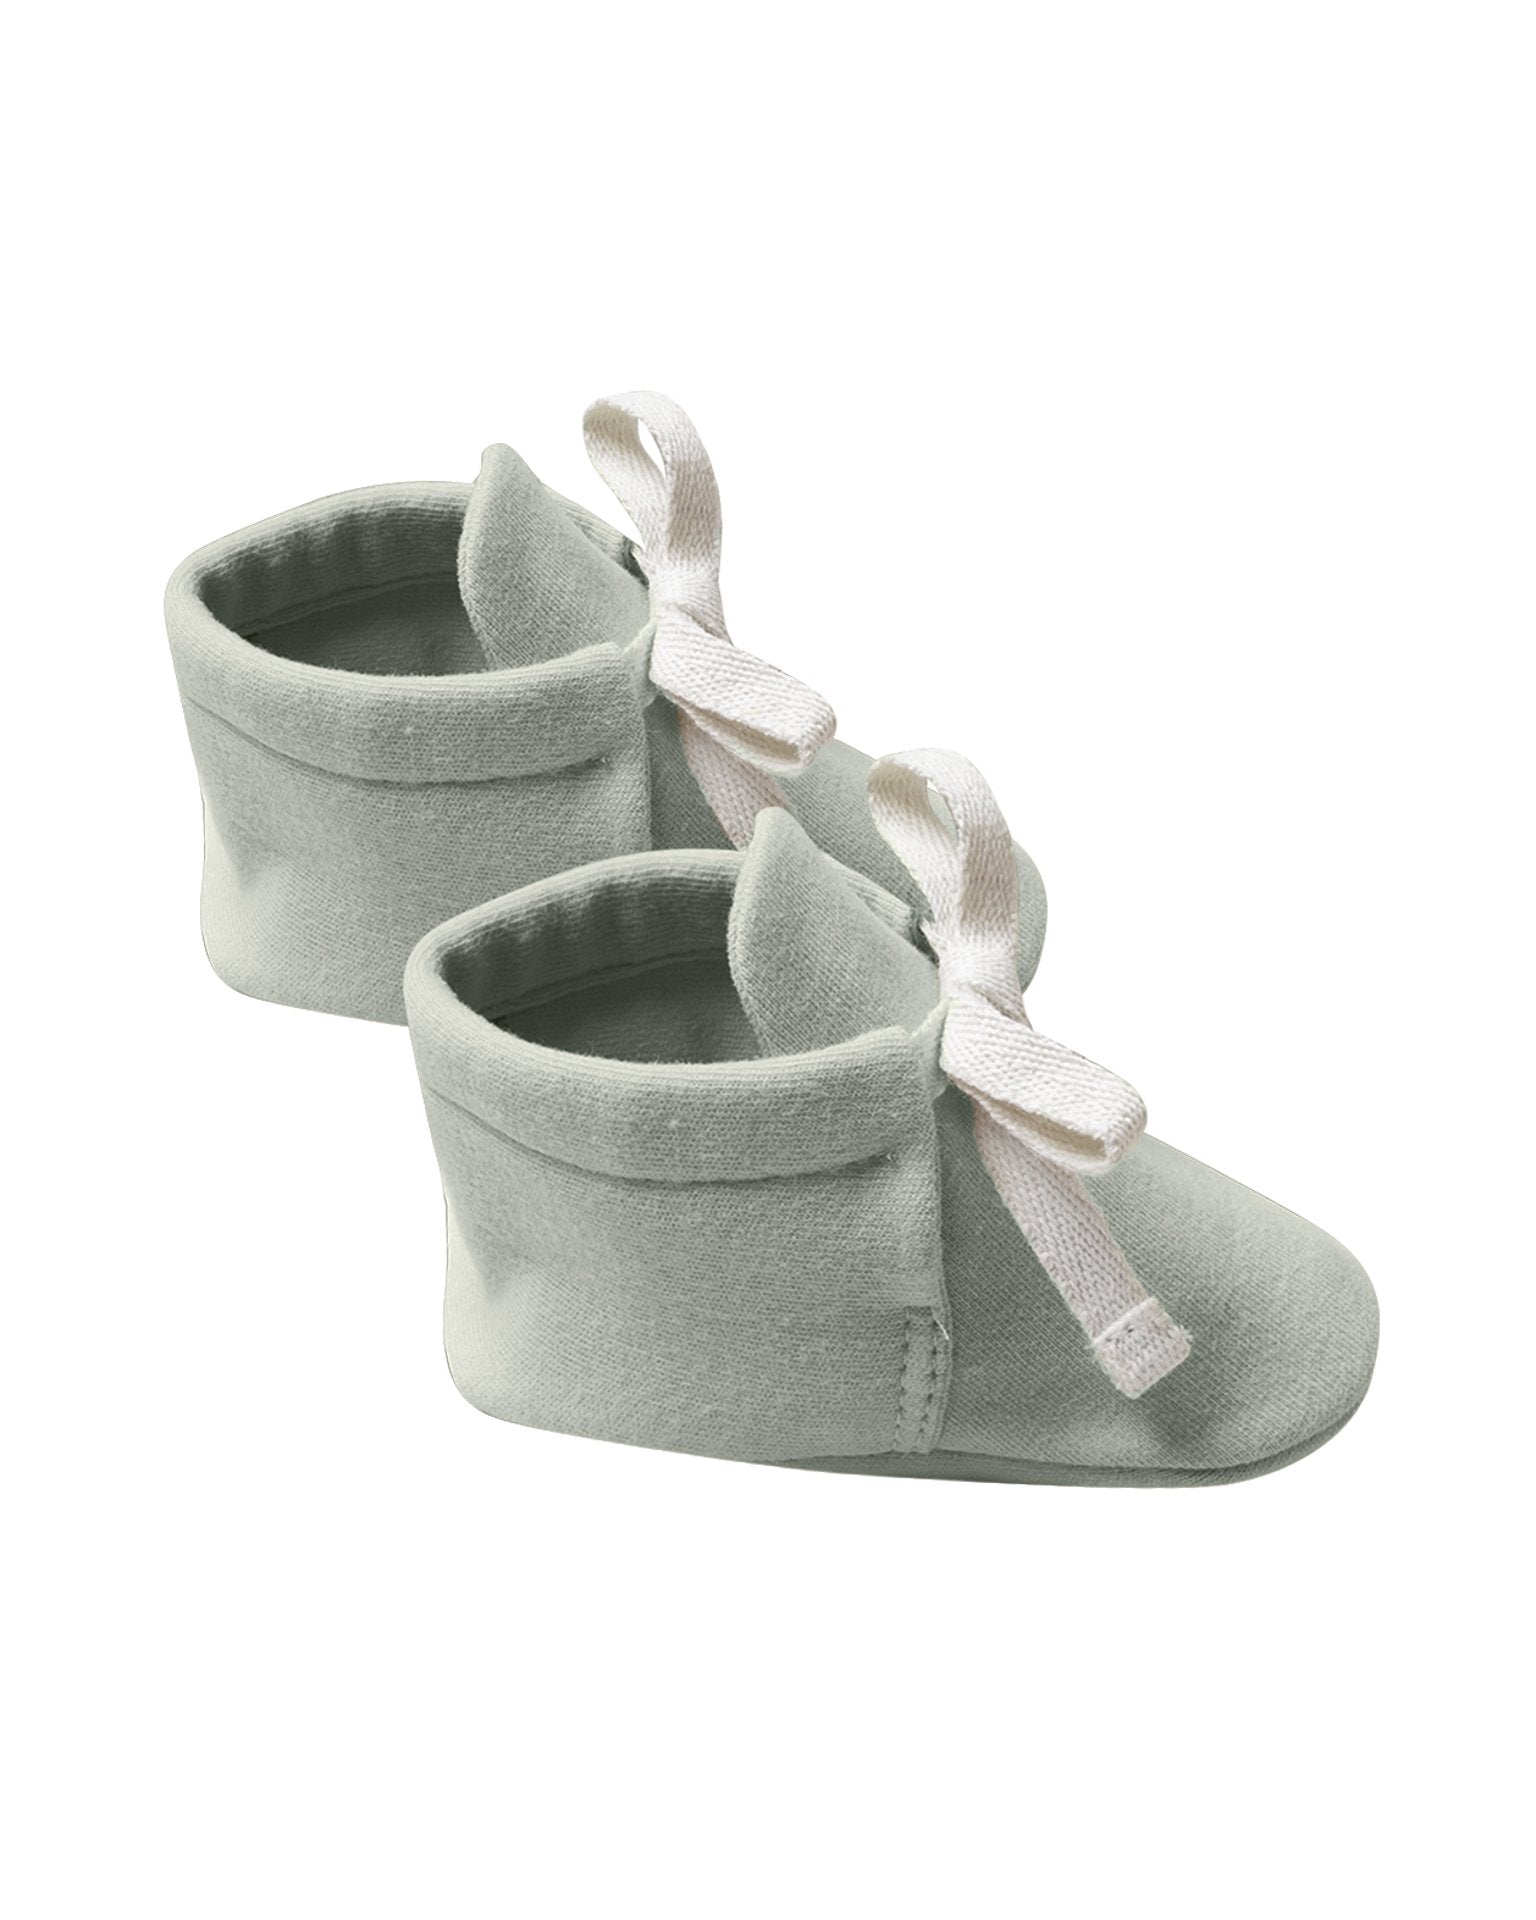 quincy mae baby booties in sage - Little